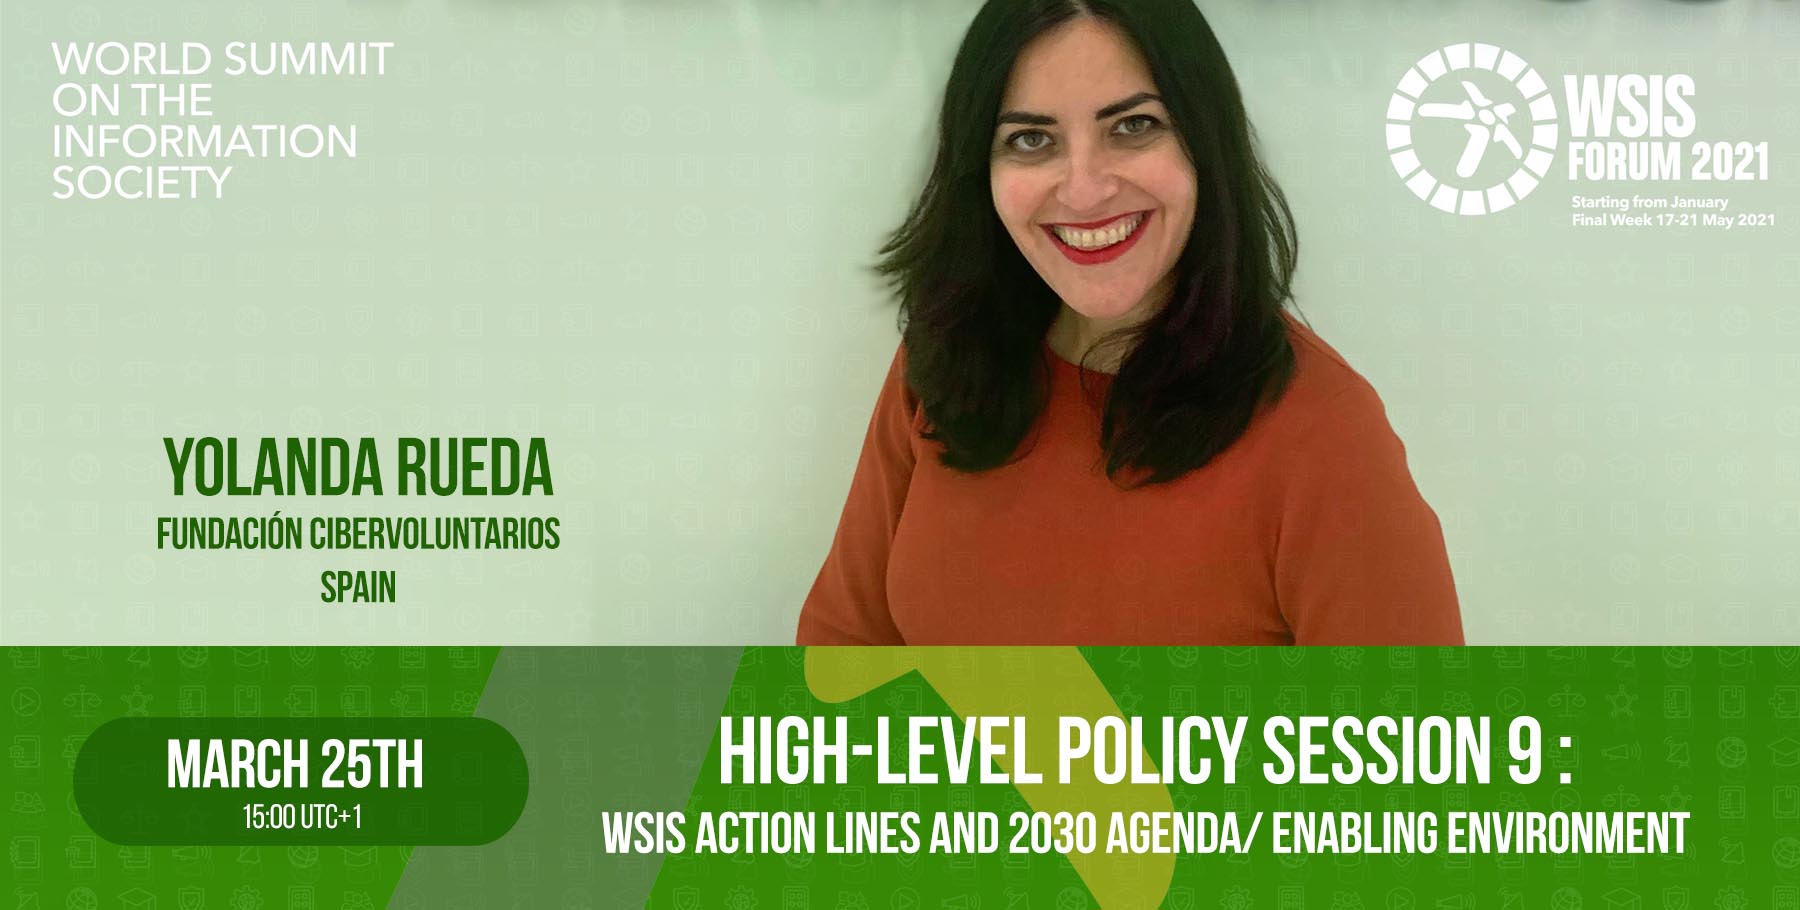 Cibervoluntarios in the High-Level Policy Session 9: WSIS Action Lines and 2030 Agenda